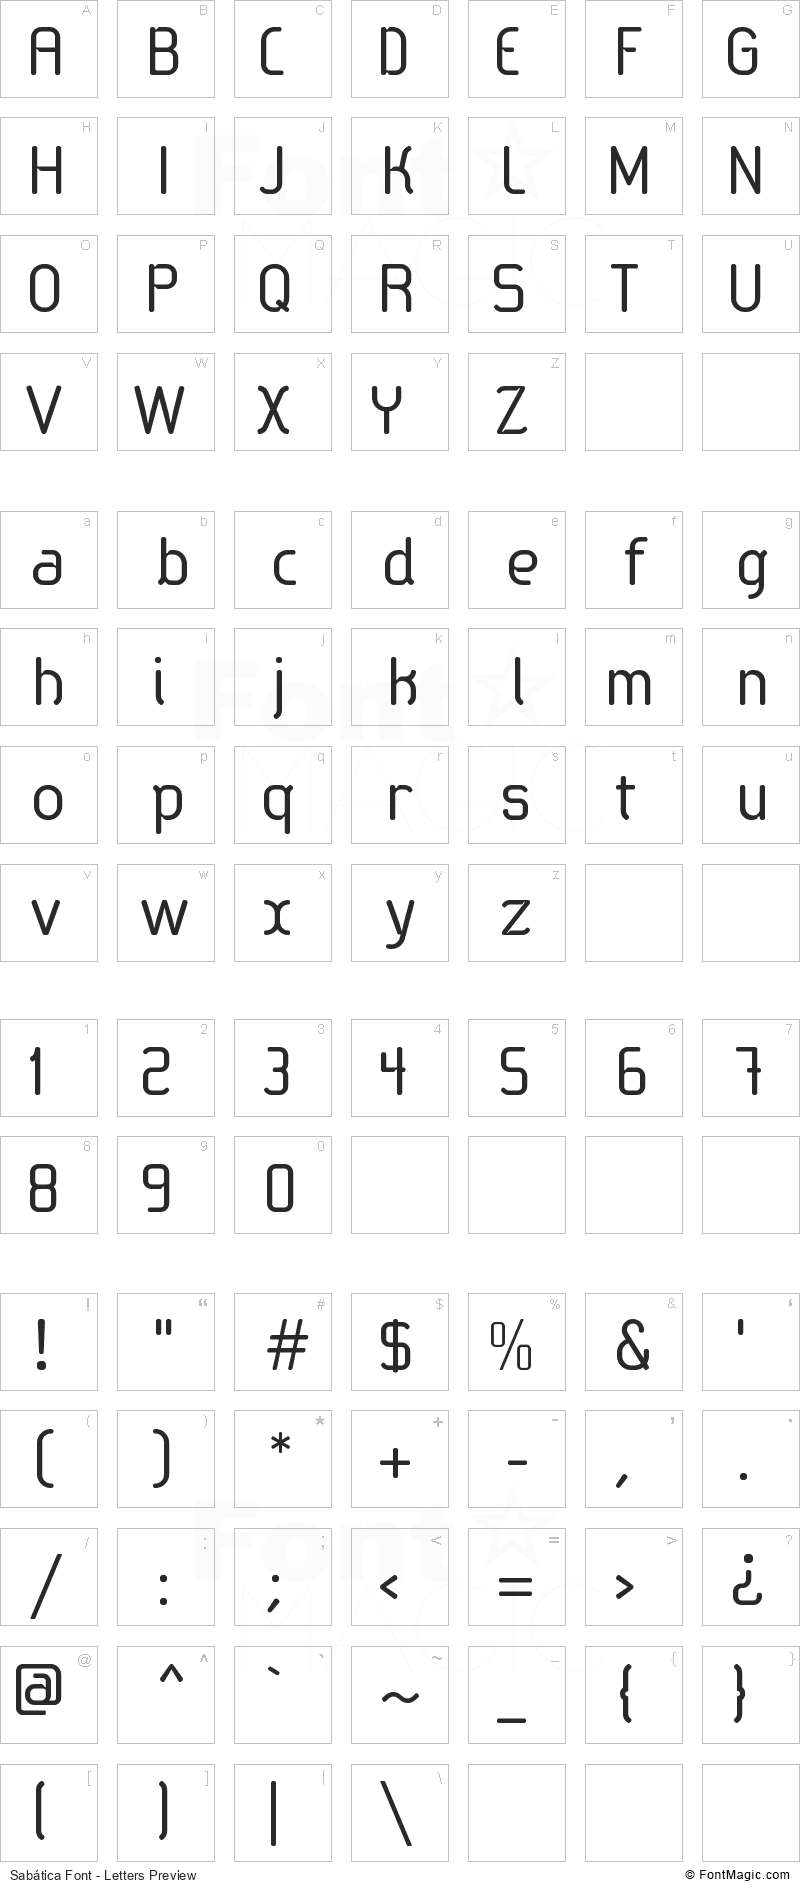 Sabática Font - All Latters Preview Chart